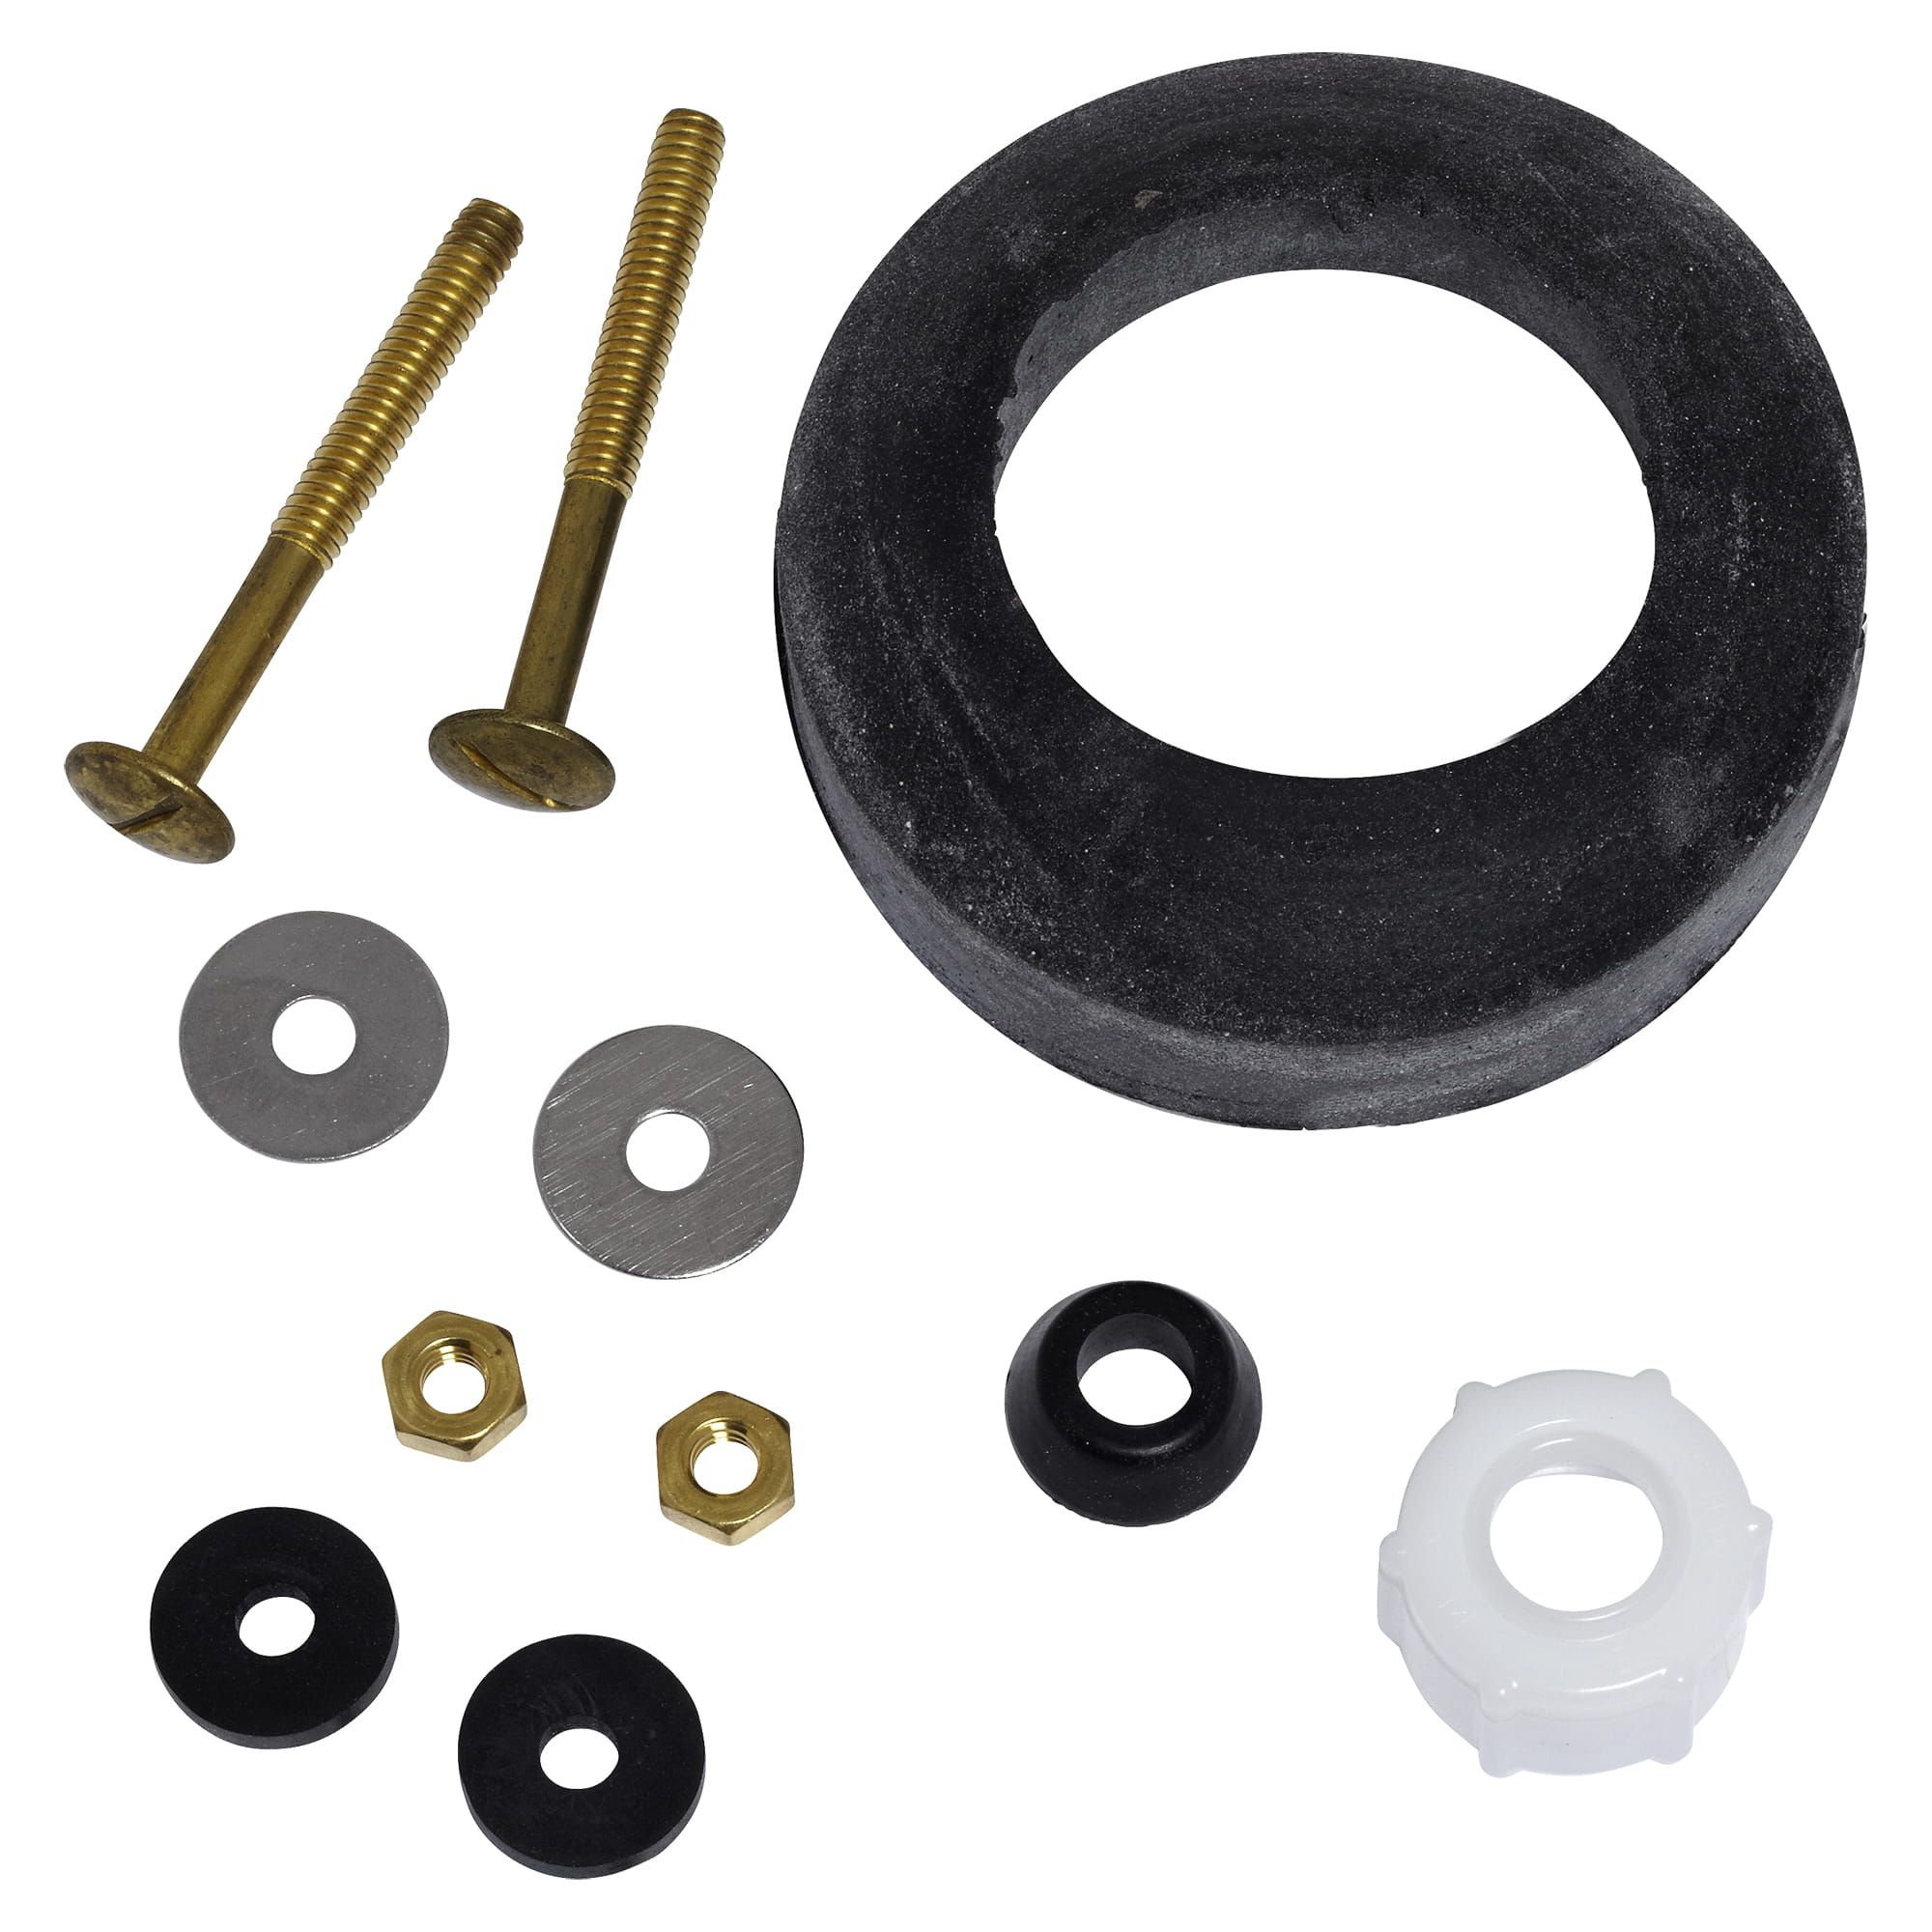 68-7958 Tank to Bowl Kit for American Standard Heavy Duty Kissler & Company Inc Solid Brass 